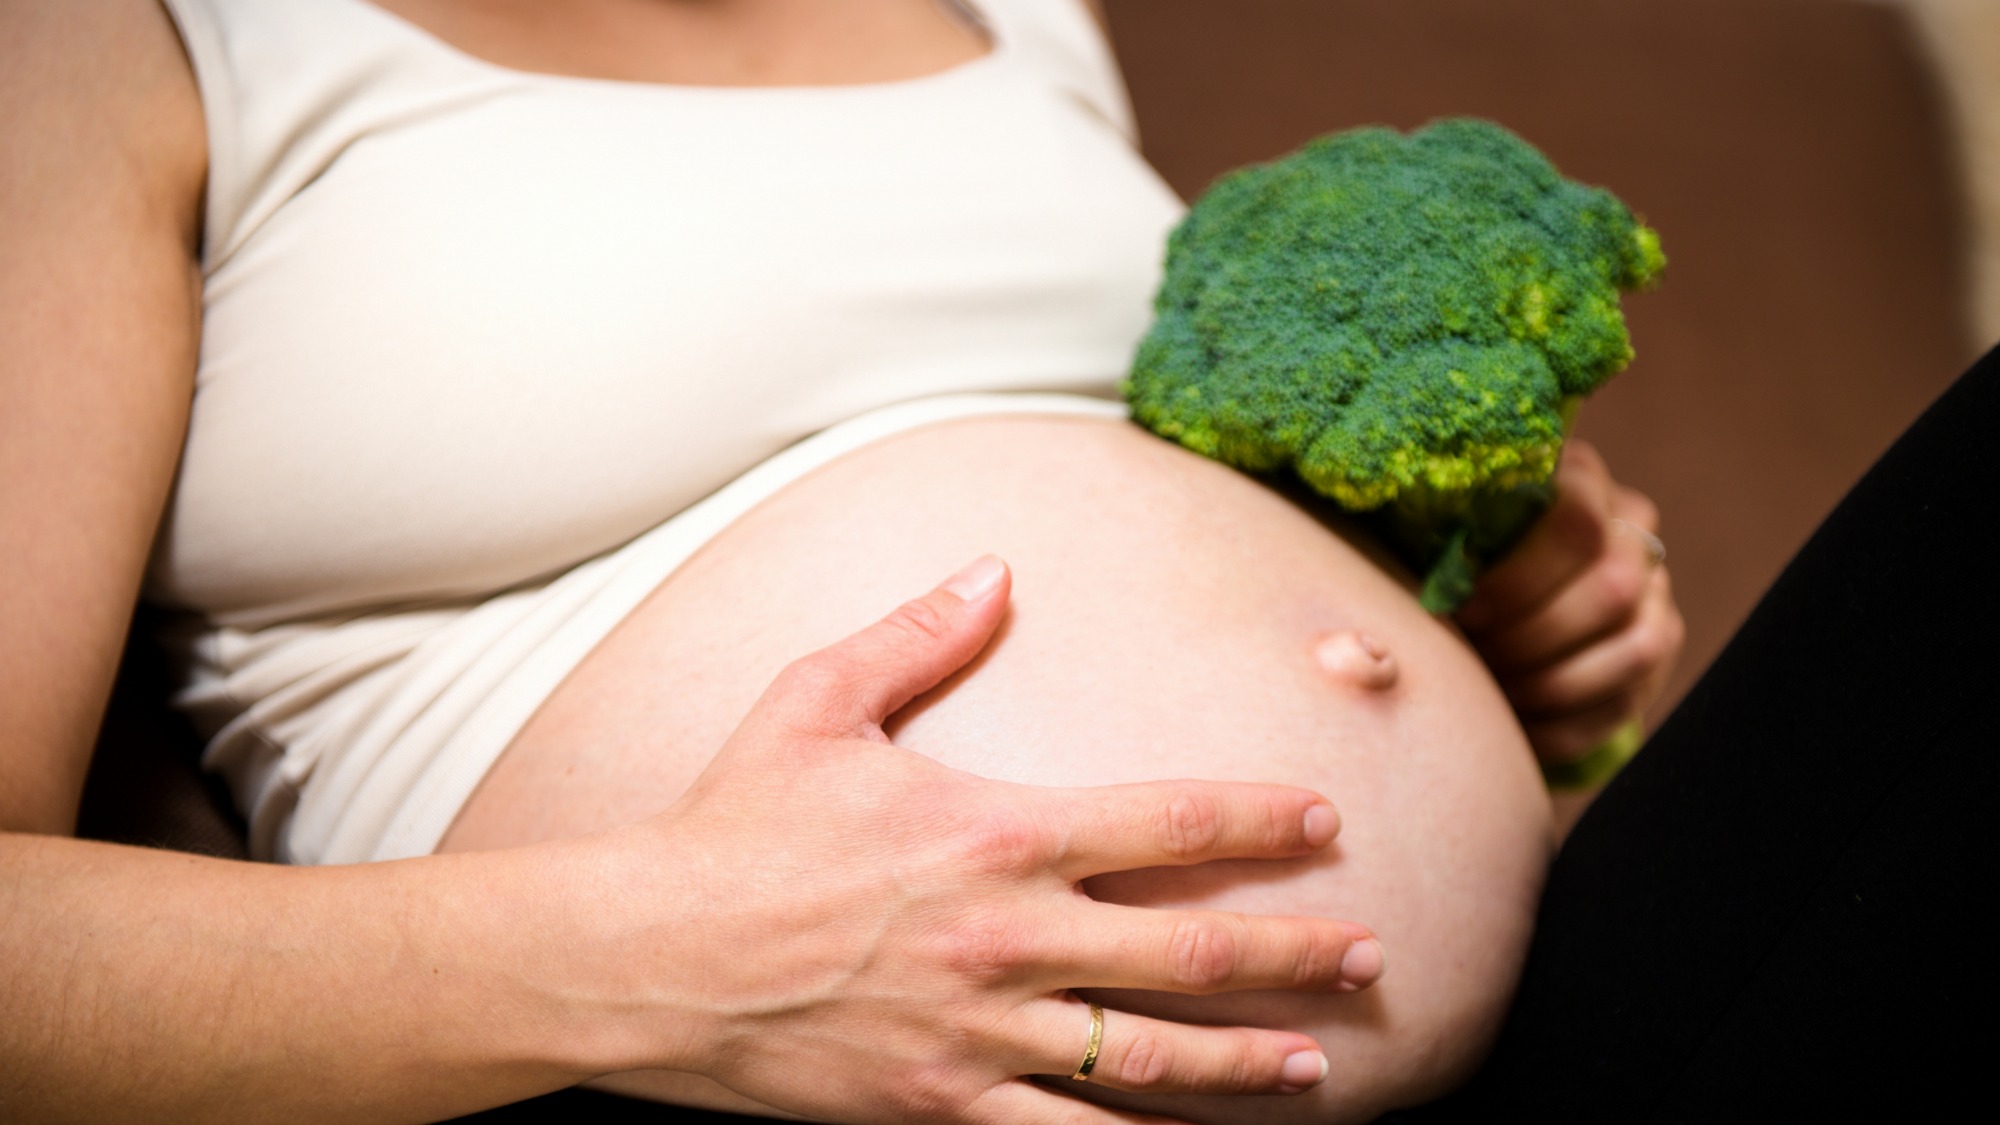 A pregnant lady with broccoli